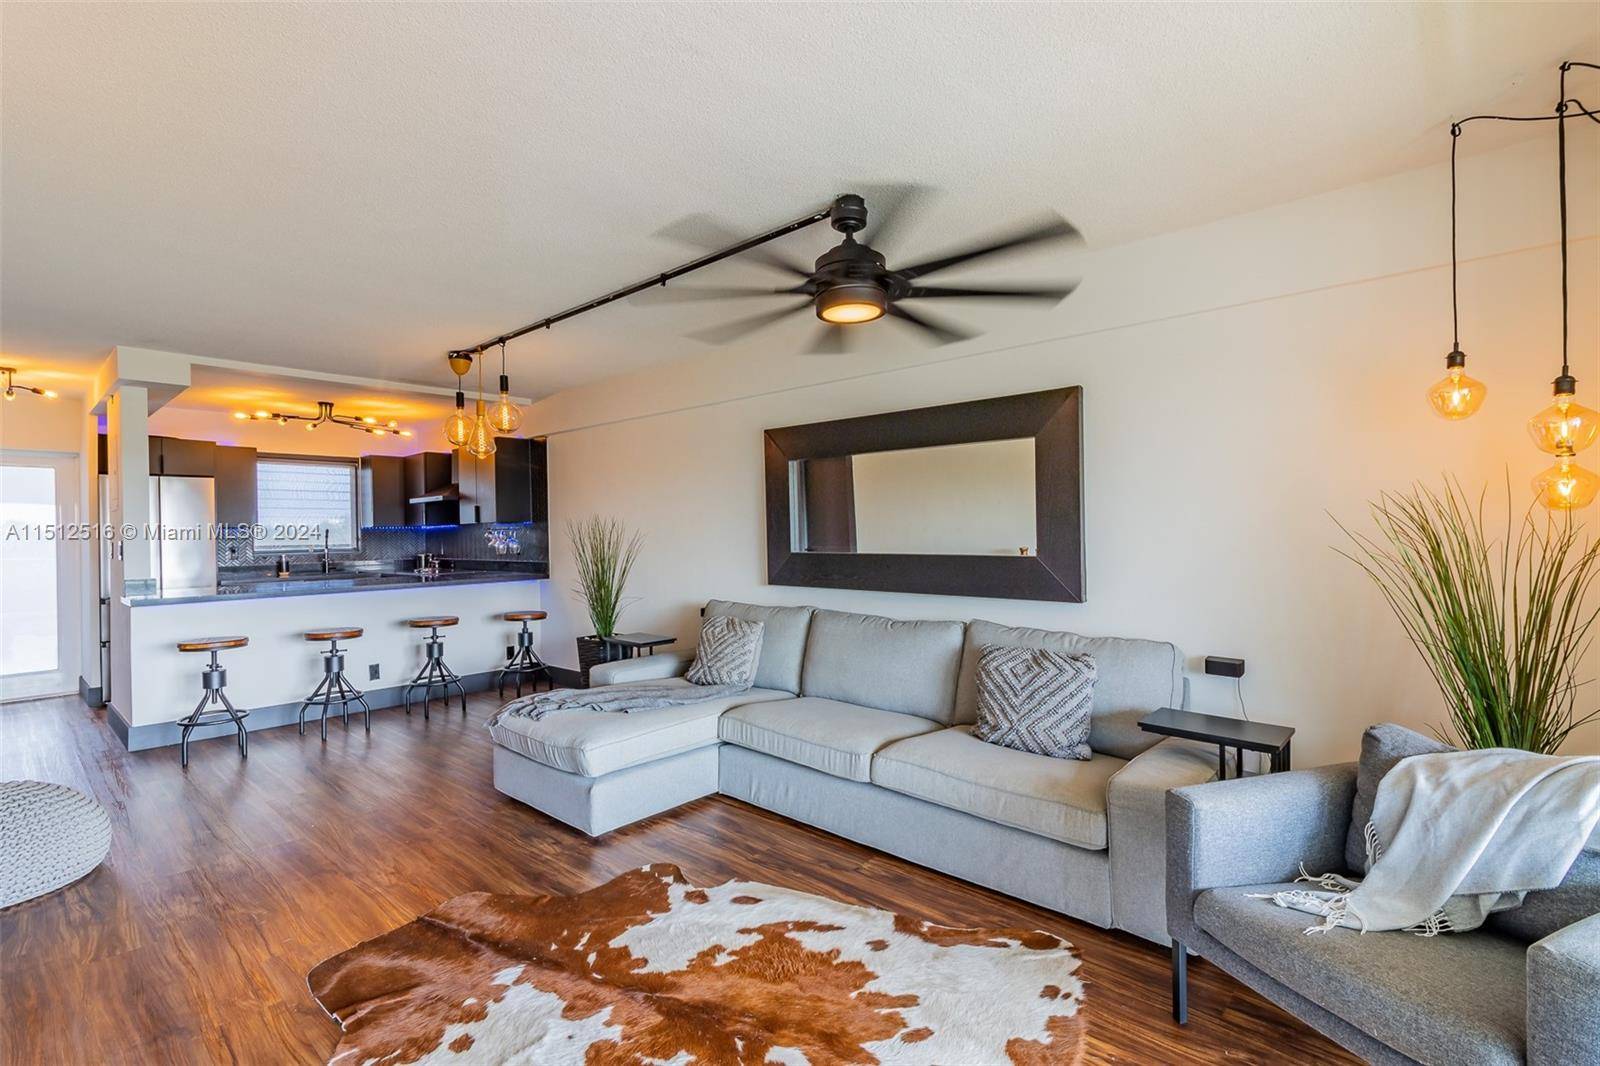 Prime Location ! Located within the opulence of a million dollar neighborhood, this meticulously renovated 2 bed, 2 bath unit offers a poolside view and picturesque waterfront scenery.